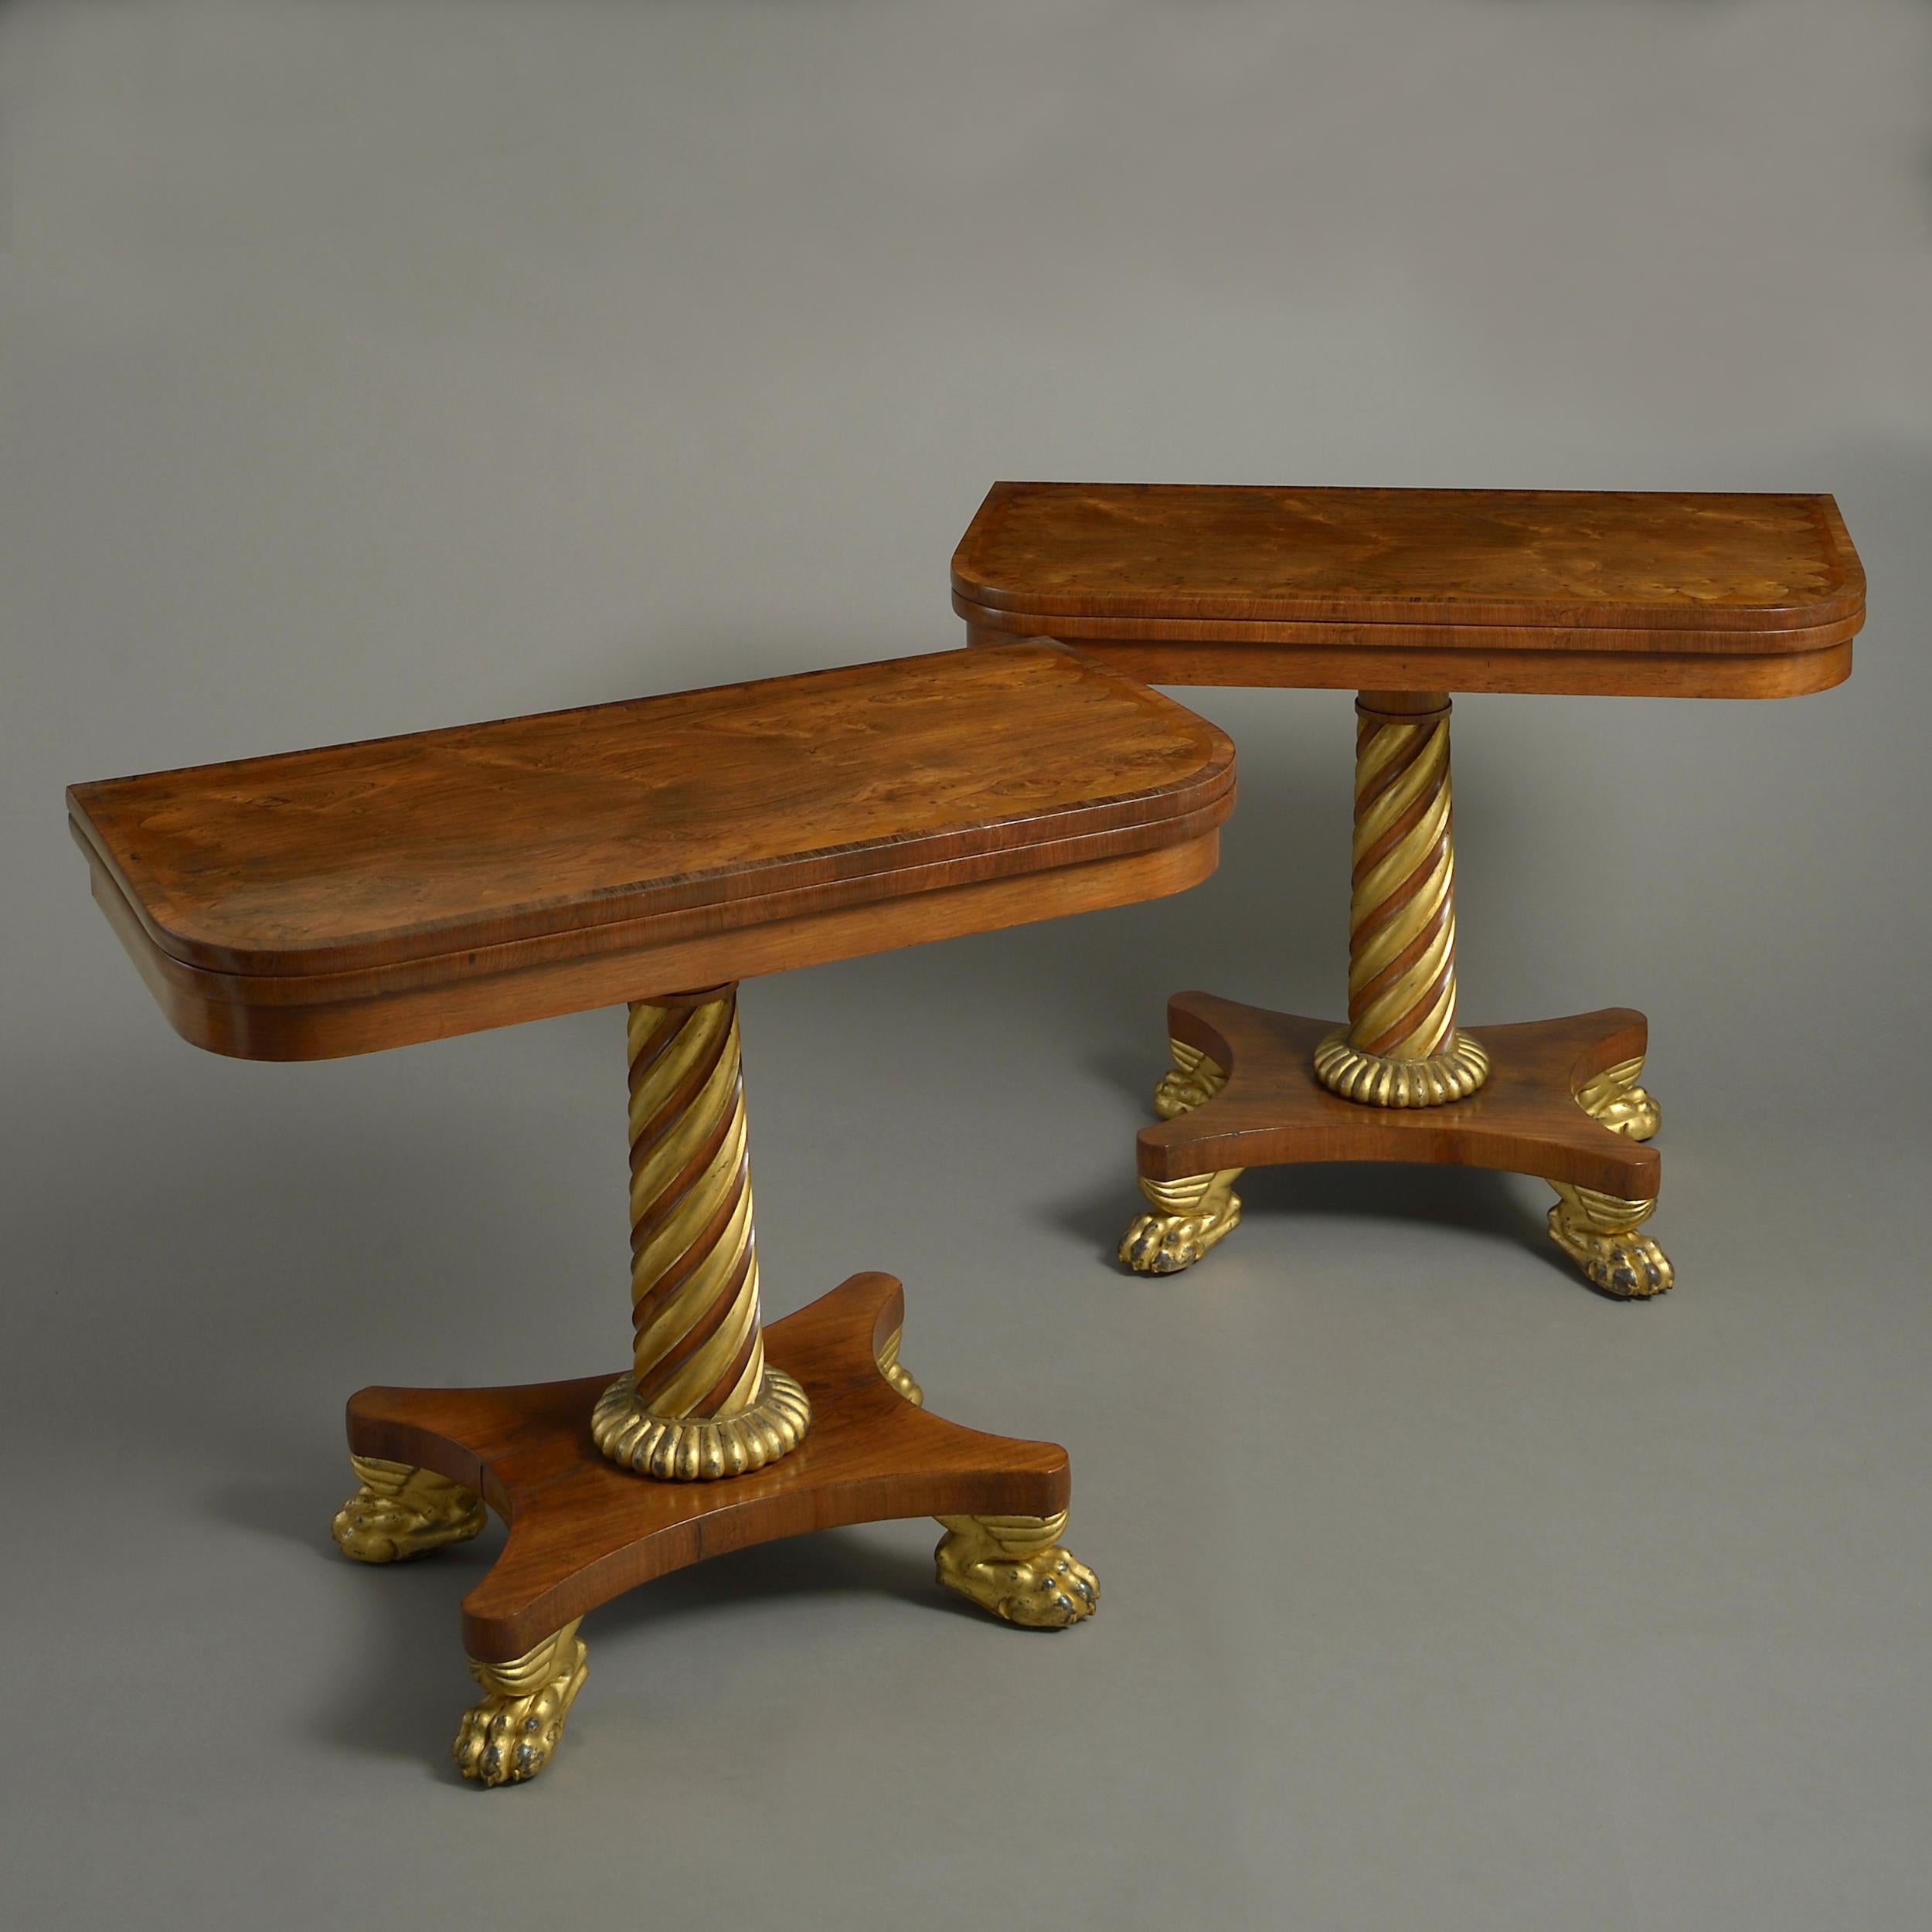 A fine pair of Regency rosewood and parcel-gilt card tables, circa 1820.

Each with a swiveling fold-over top, inlaid in yew-wood with a pattern of gothic arcading. The interiors lined in red baize.